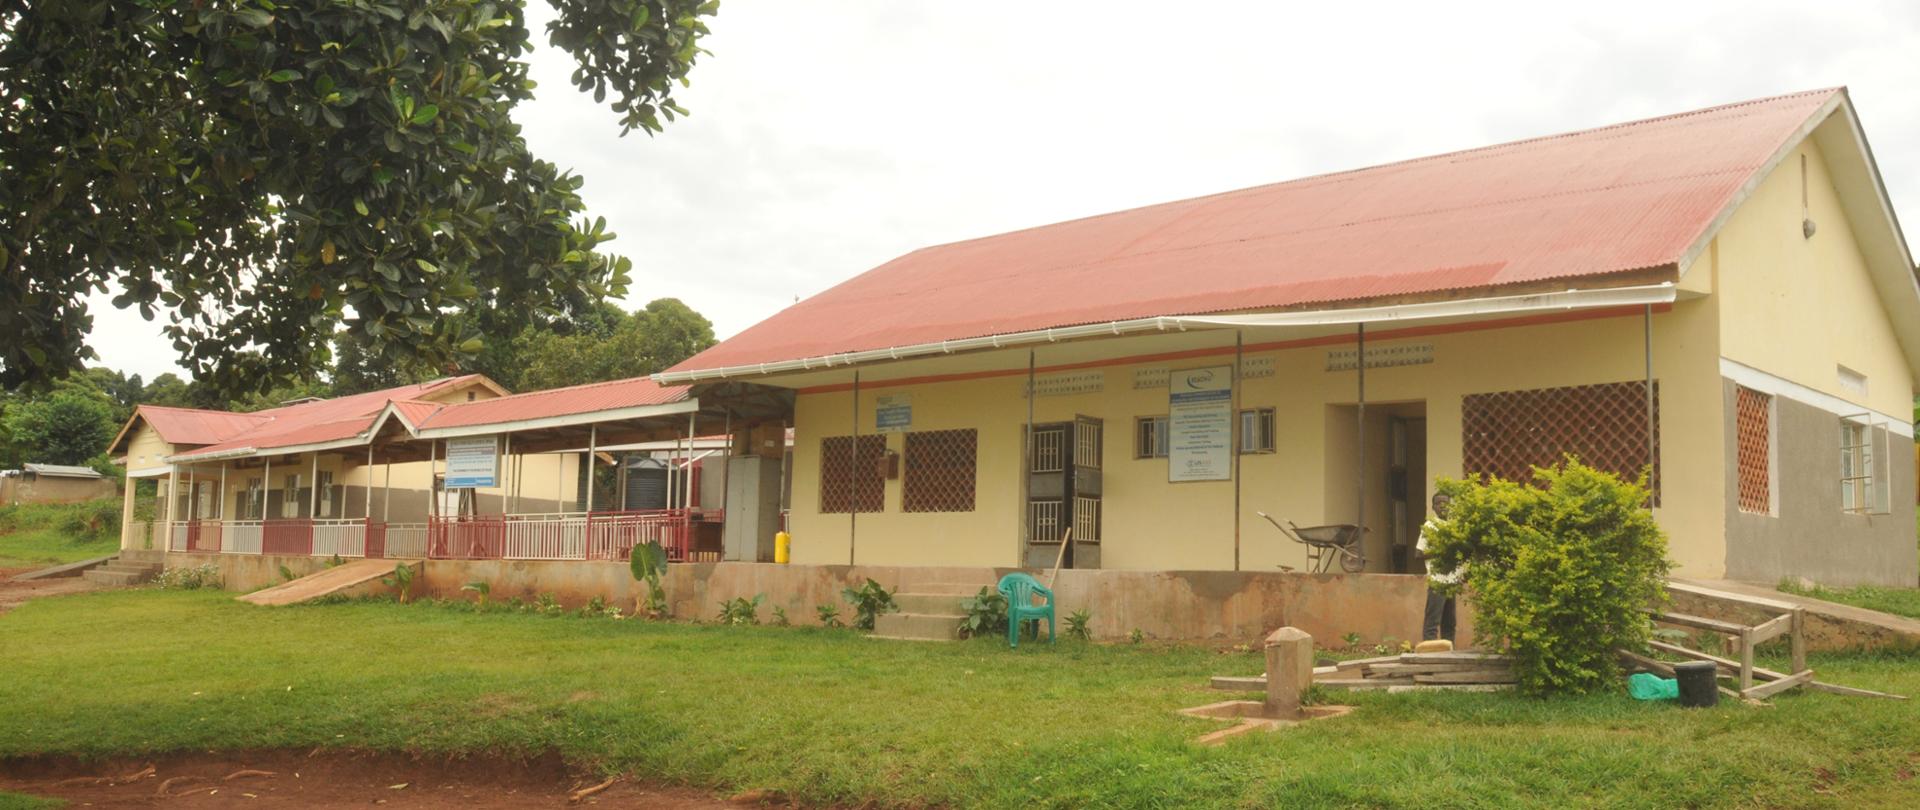 Mukono, Uganda. 4th, December, 2018. Mpunge Health Center III (KOJA SYBIRAKI HEALTH CENTER) that was renovated with funds from the Embassy of the Republic of Poland.